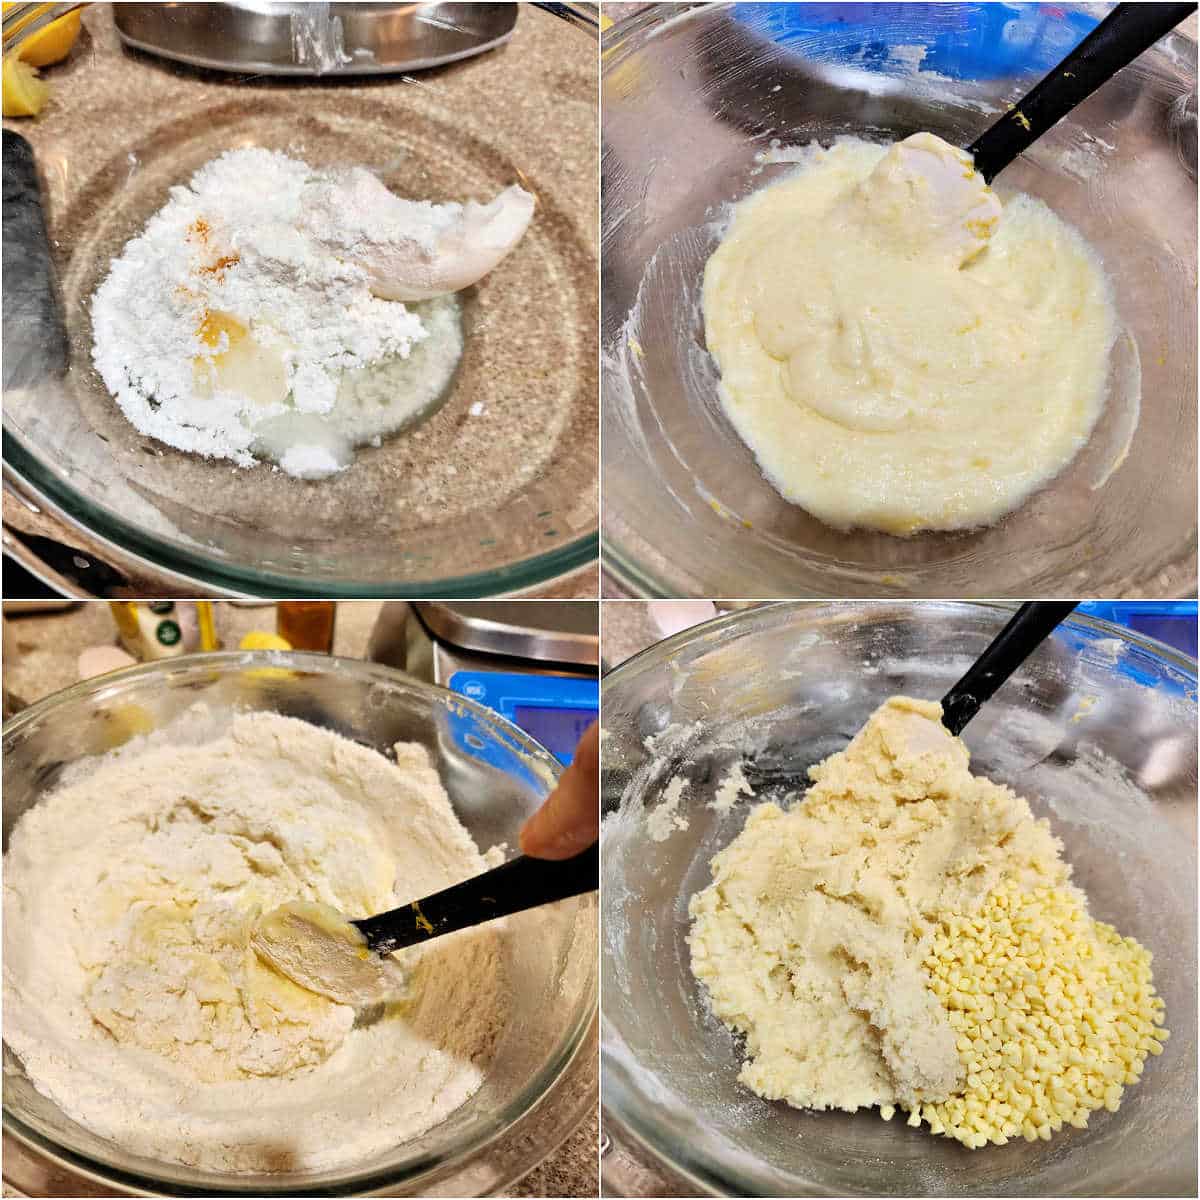 A collage of four images showing mixing the batter to make lemon coolers: ingredients in a glass bowl, ingredients all blended together with a spatula, dry ingredients being stirred together with the wet ingredients, and then mini lemon chips in the dough.